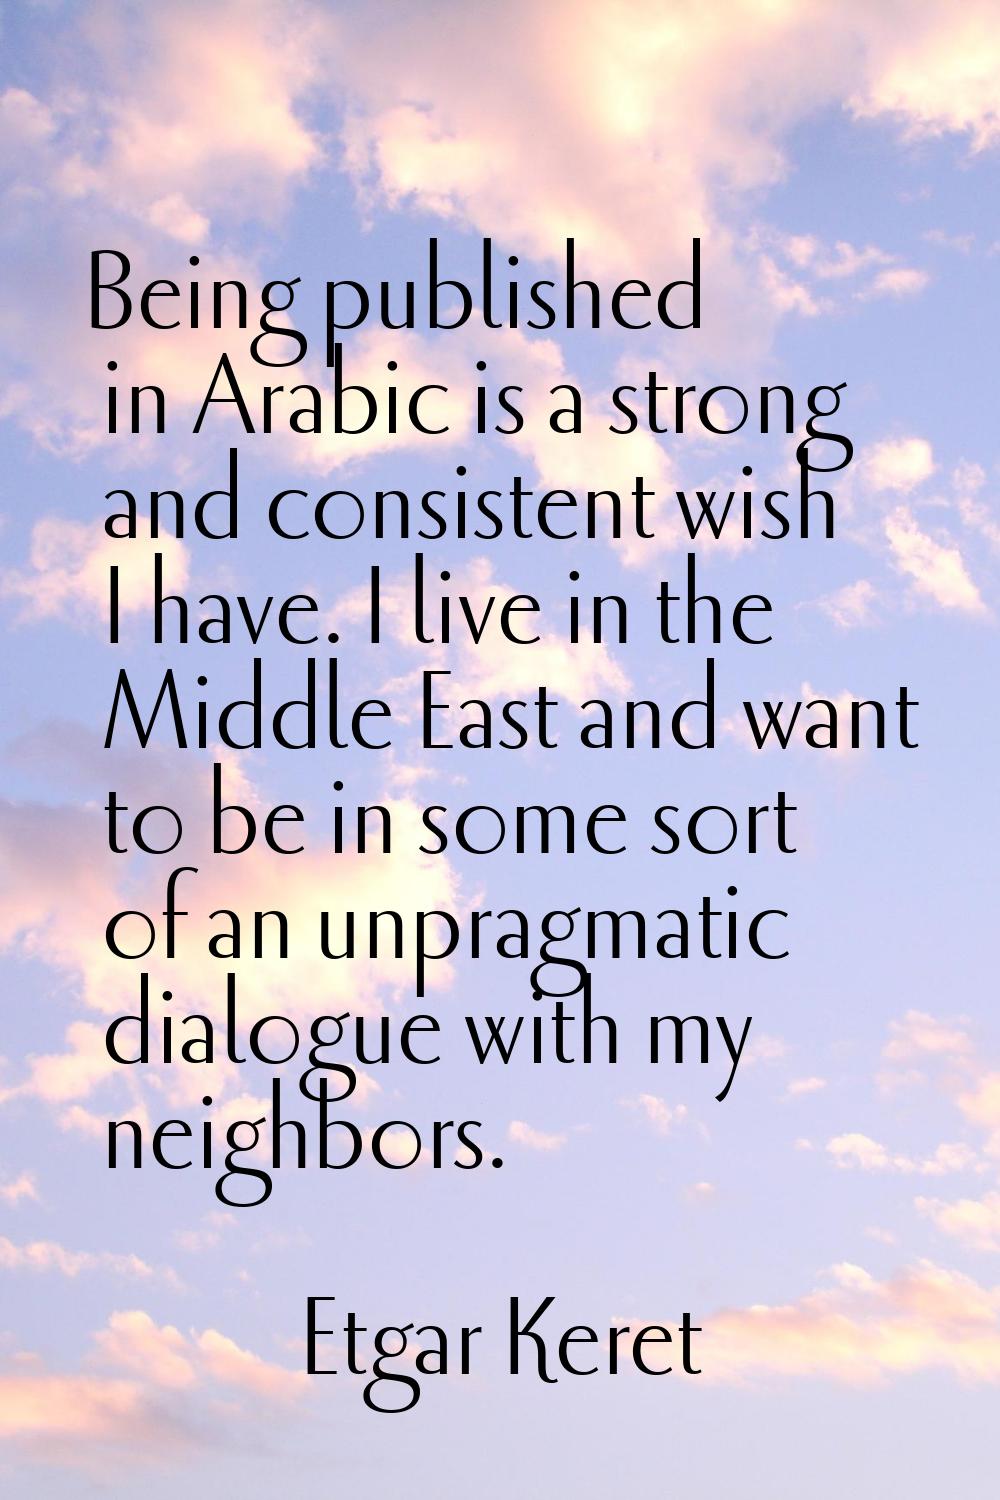 Being published in Arabic is a strong and consistent wish I have. I live in the Middle East and wan